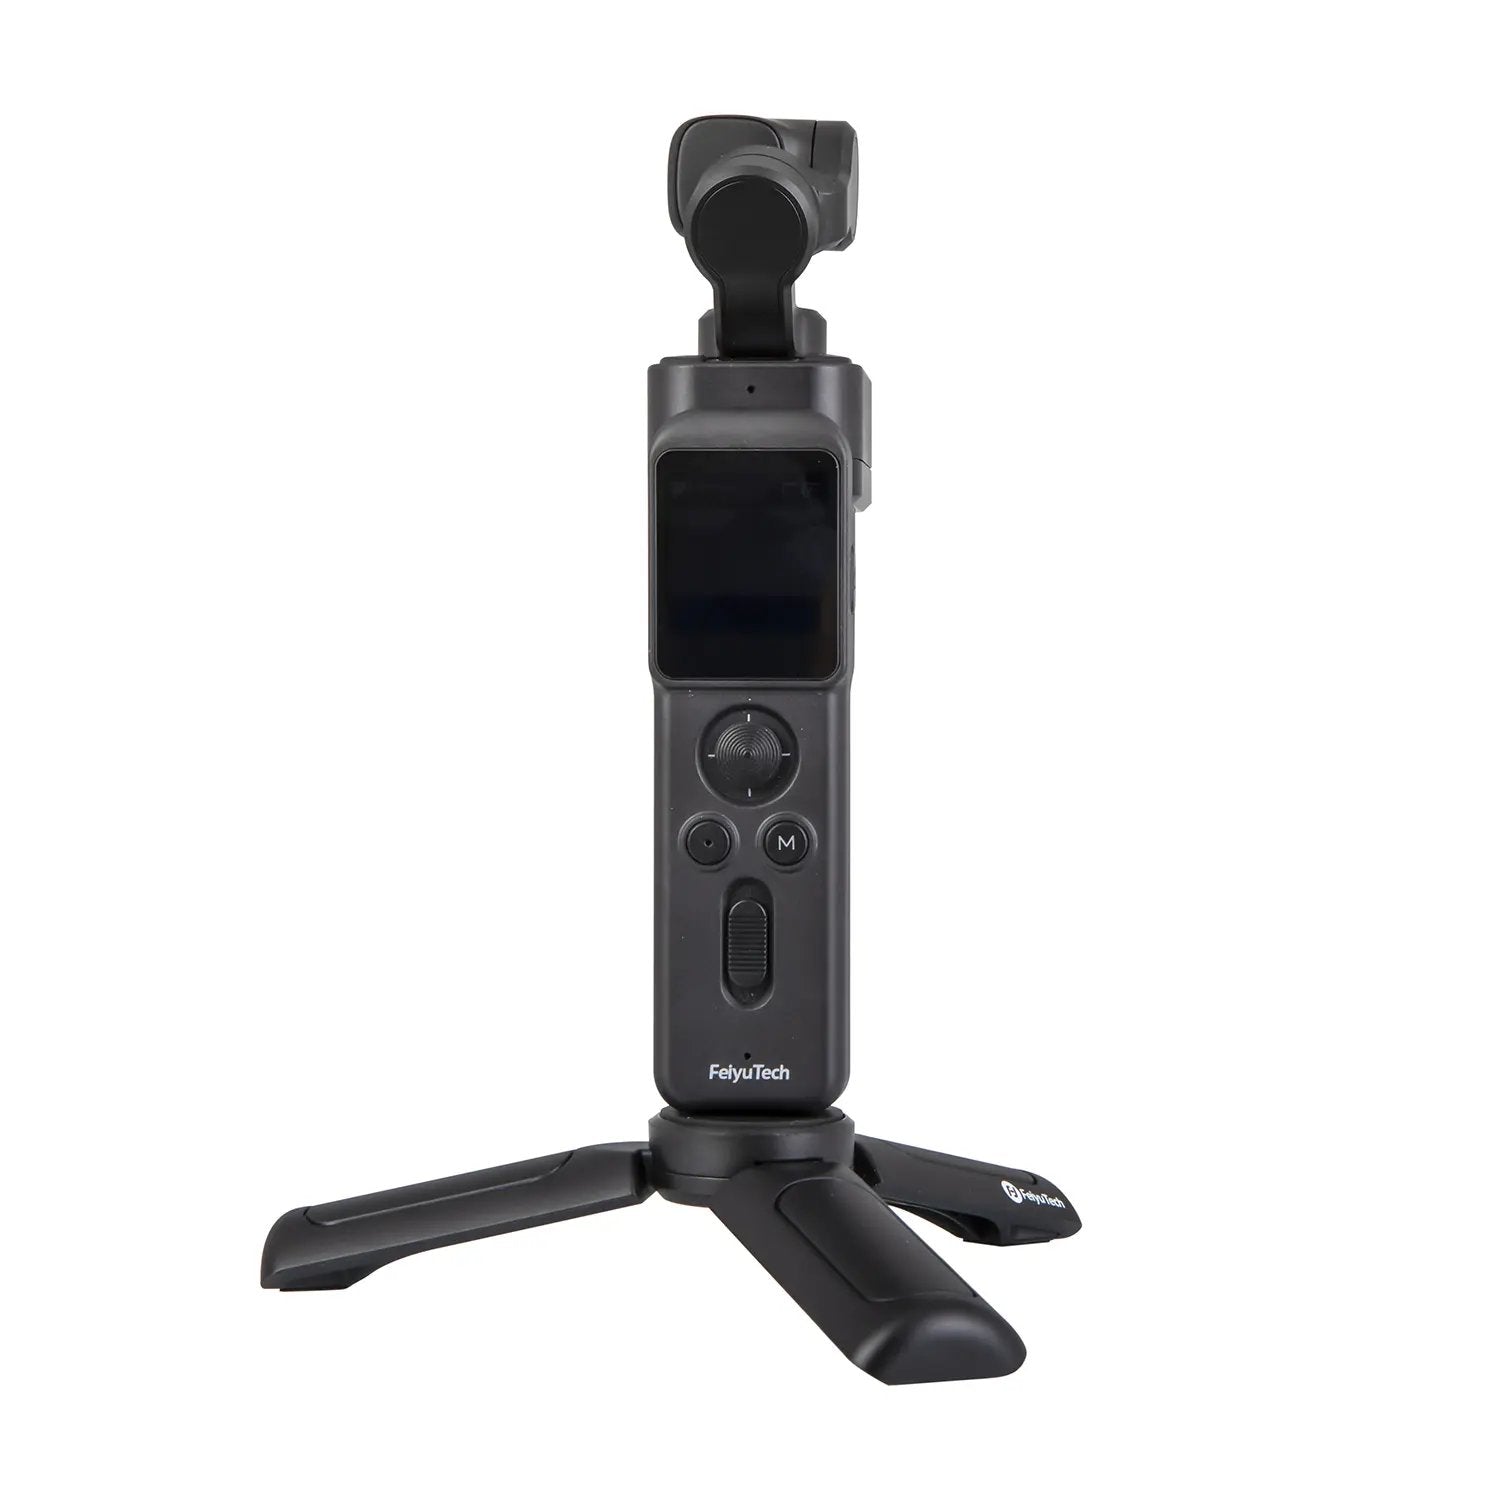 Feiyu Pocket 3 Stabilized Action Camera and Remote Handle